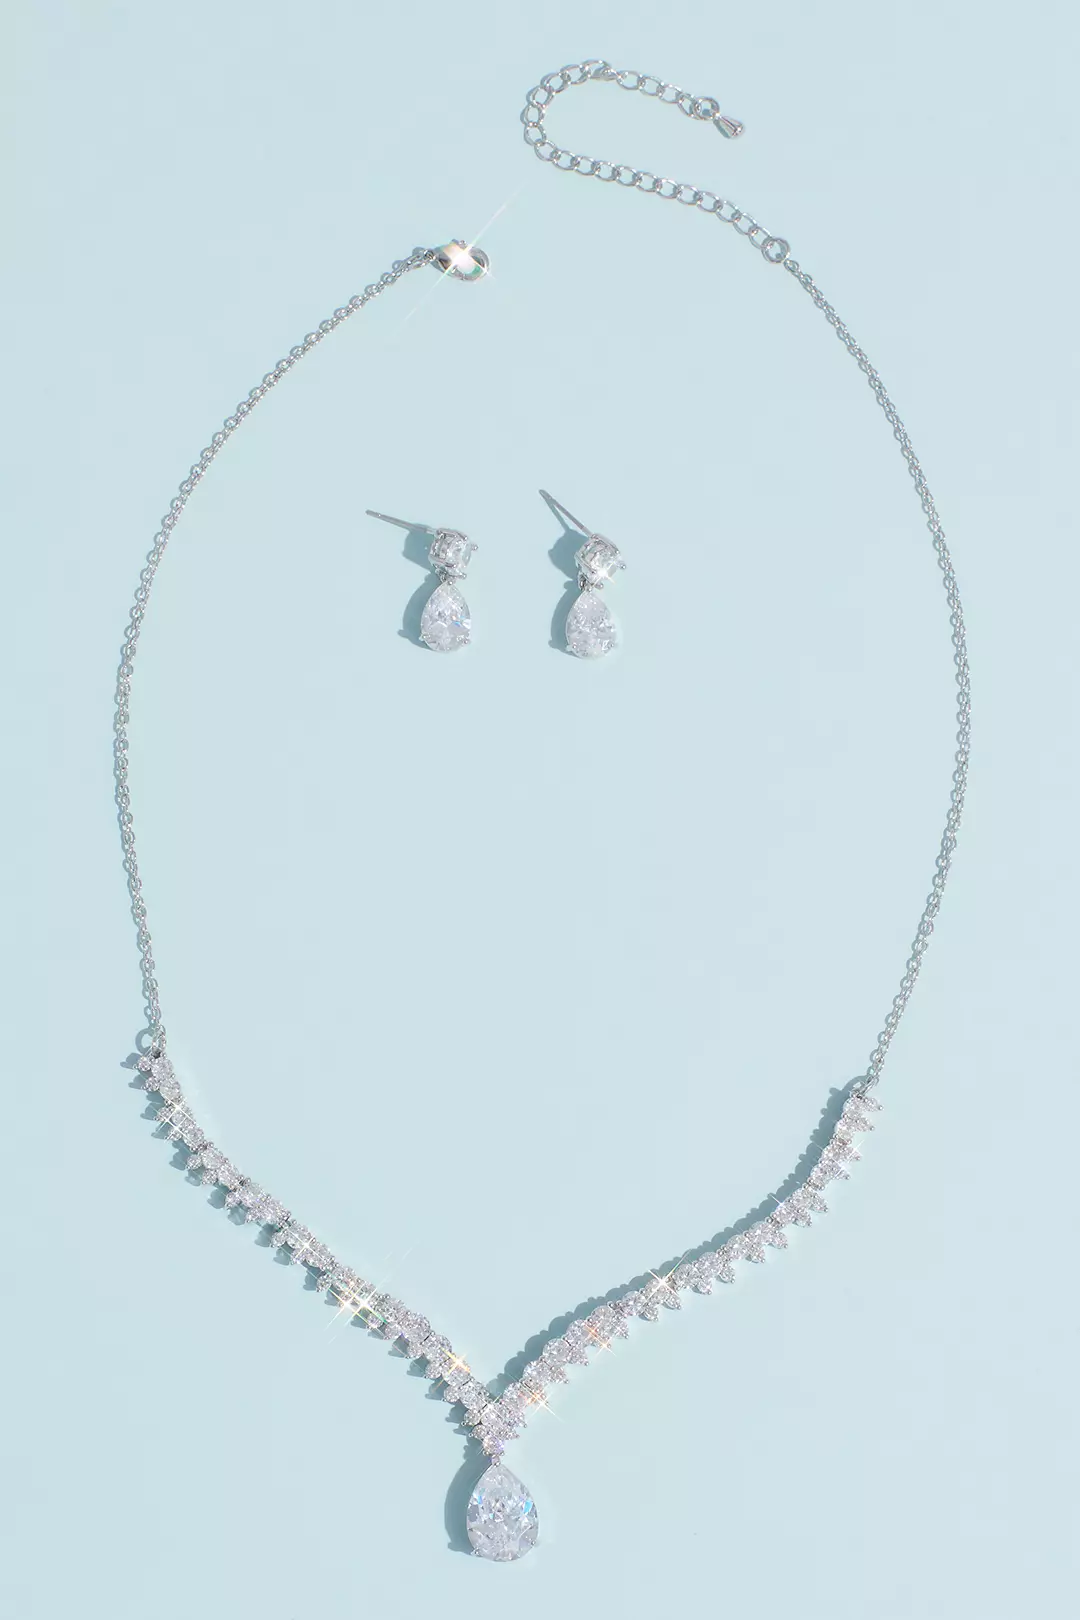 Cubic Zirconia Teardrop Necklace and Earrings Set Image